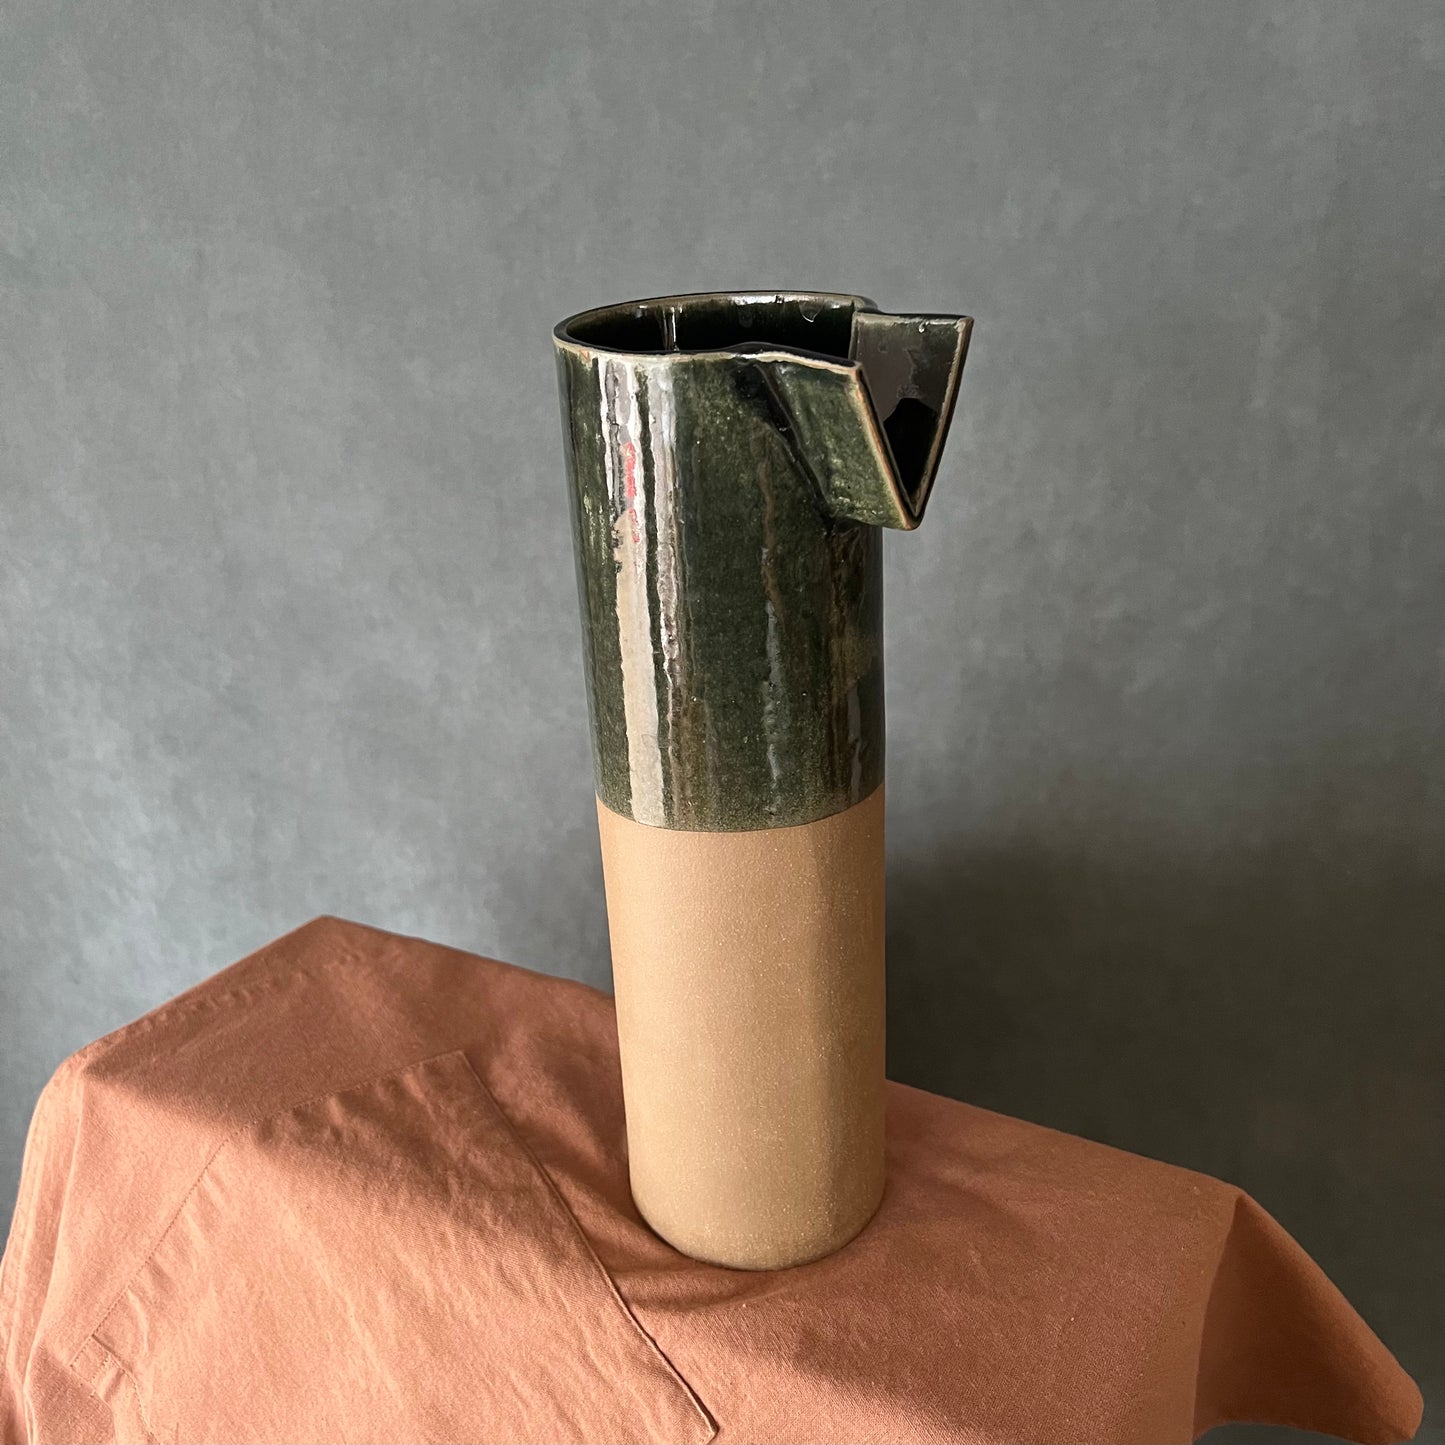 Pitcher by Meltz in Neutral Colors